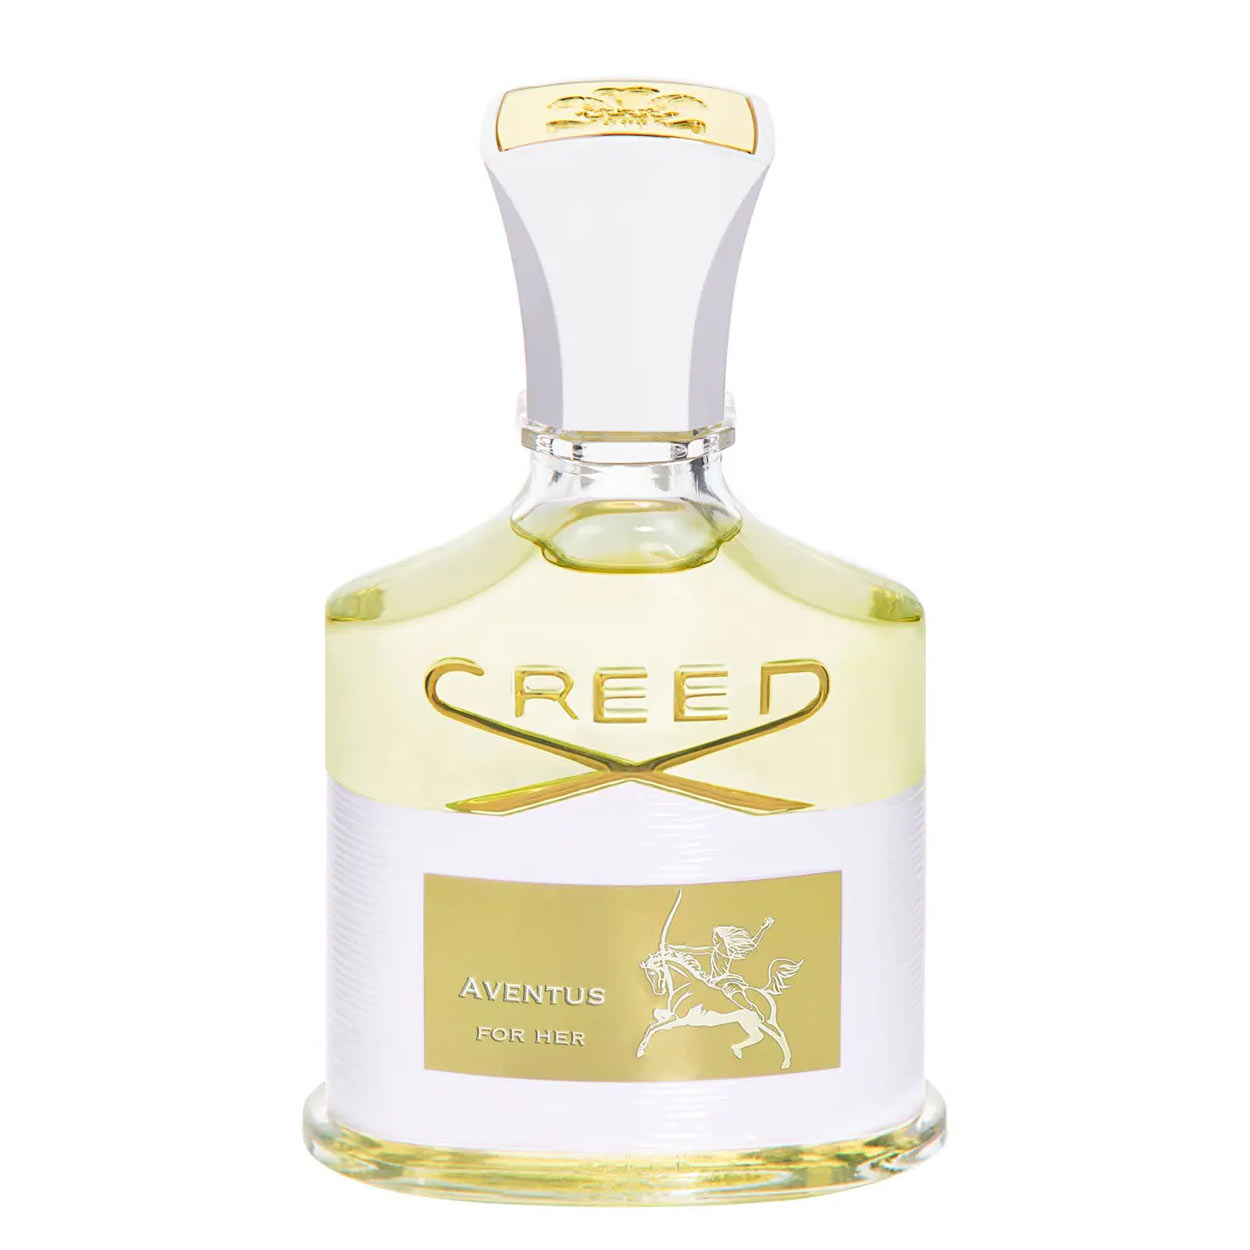 Creed Aventus For Her Creed Image